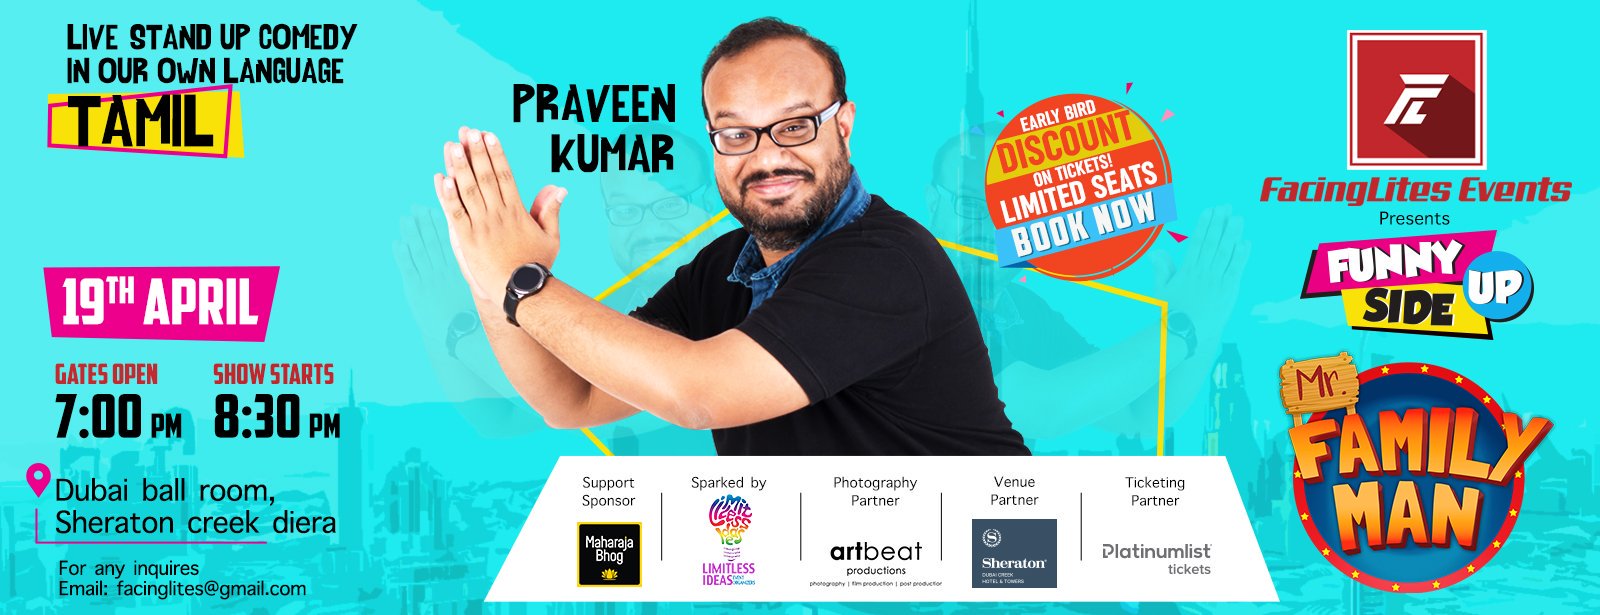 Tamil Stand-up Comedy with Praveen Kumar - Coming Soon in UAE